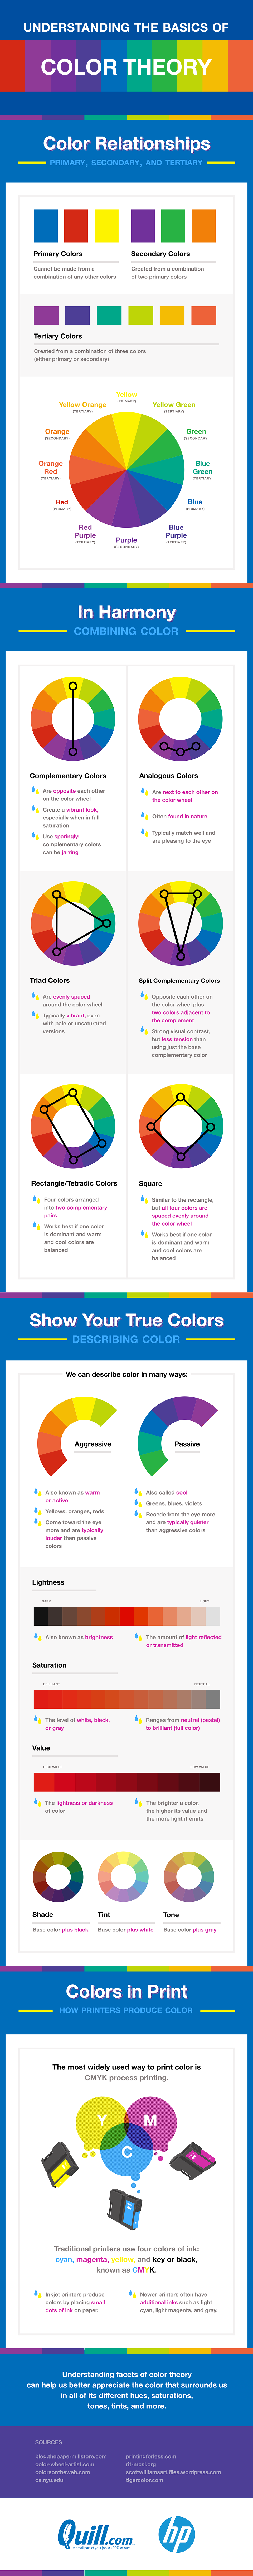 Understanding the basics of color theory, webdesign